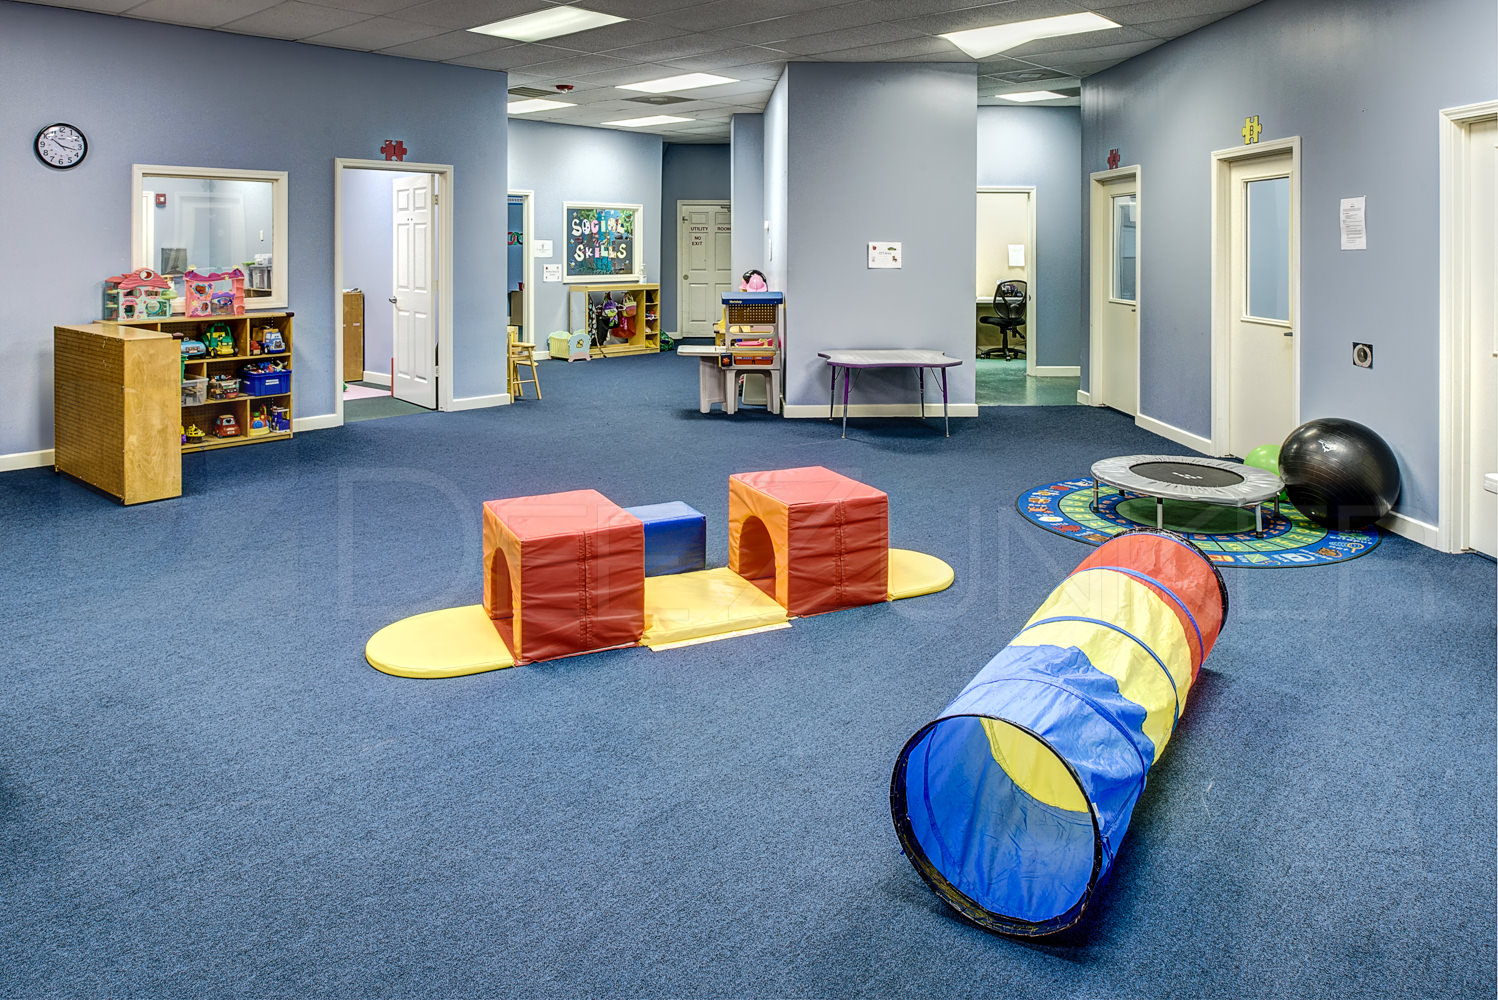 Tangible Difference Leanring Center - Katy  Tangible-Difference-Learning-Center-Katy-007.psd  Houston Commercial Architectural Photographer Dee Zunker